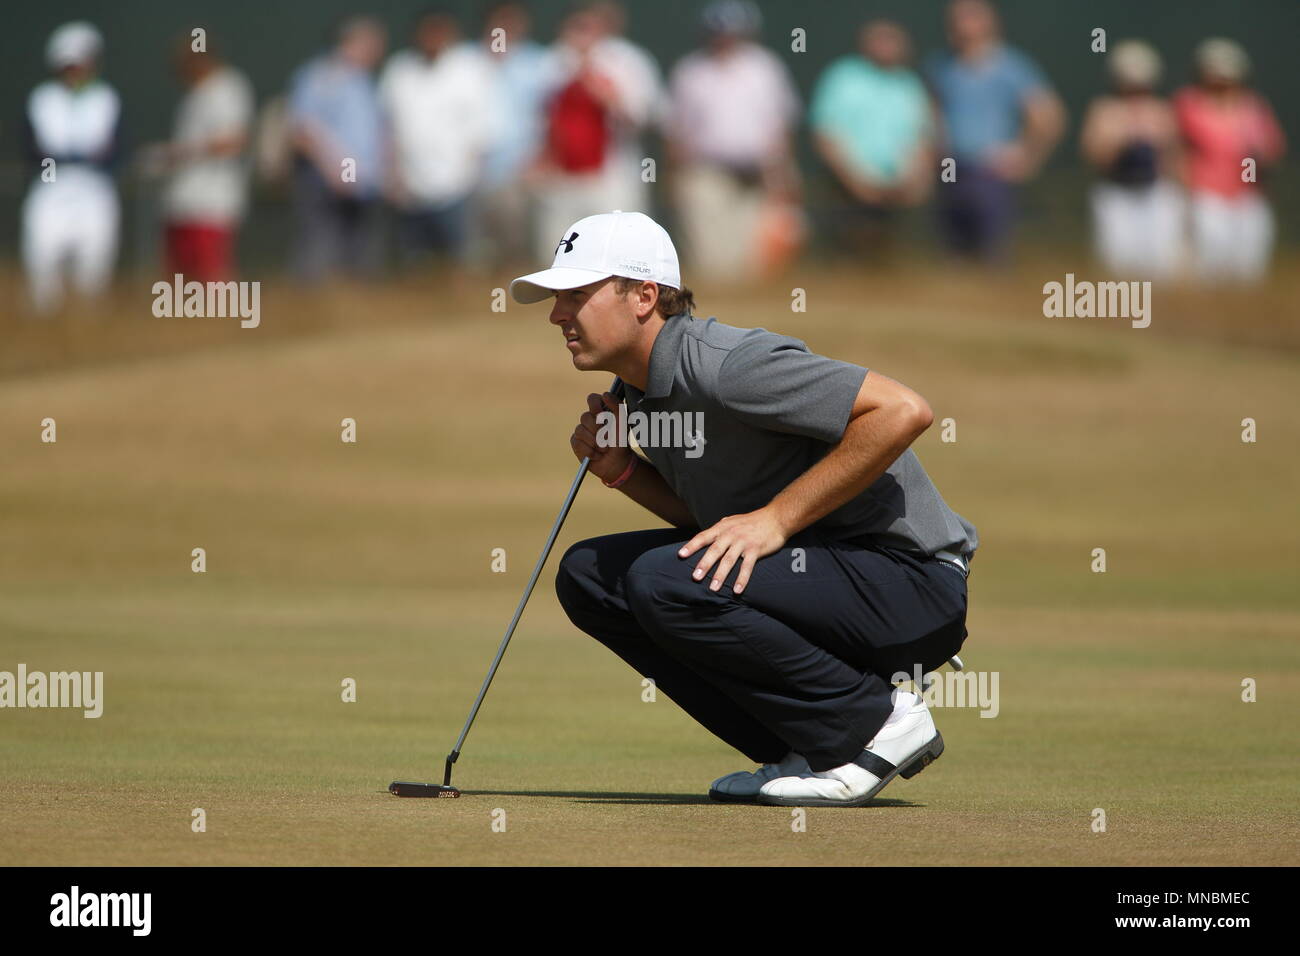 MUIRFIELD, SCOTLAND - JULY 20: Jordan Spieth studying his putt at the 1st green during the third round of The Open Championship 2013 at Muirfield Golf Club on July 20, 2013 in Scotland. Stock Photo